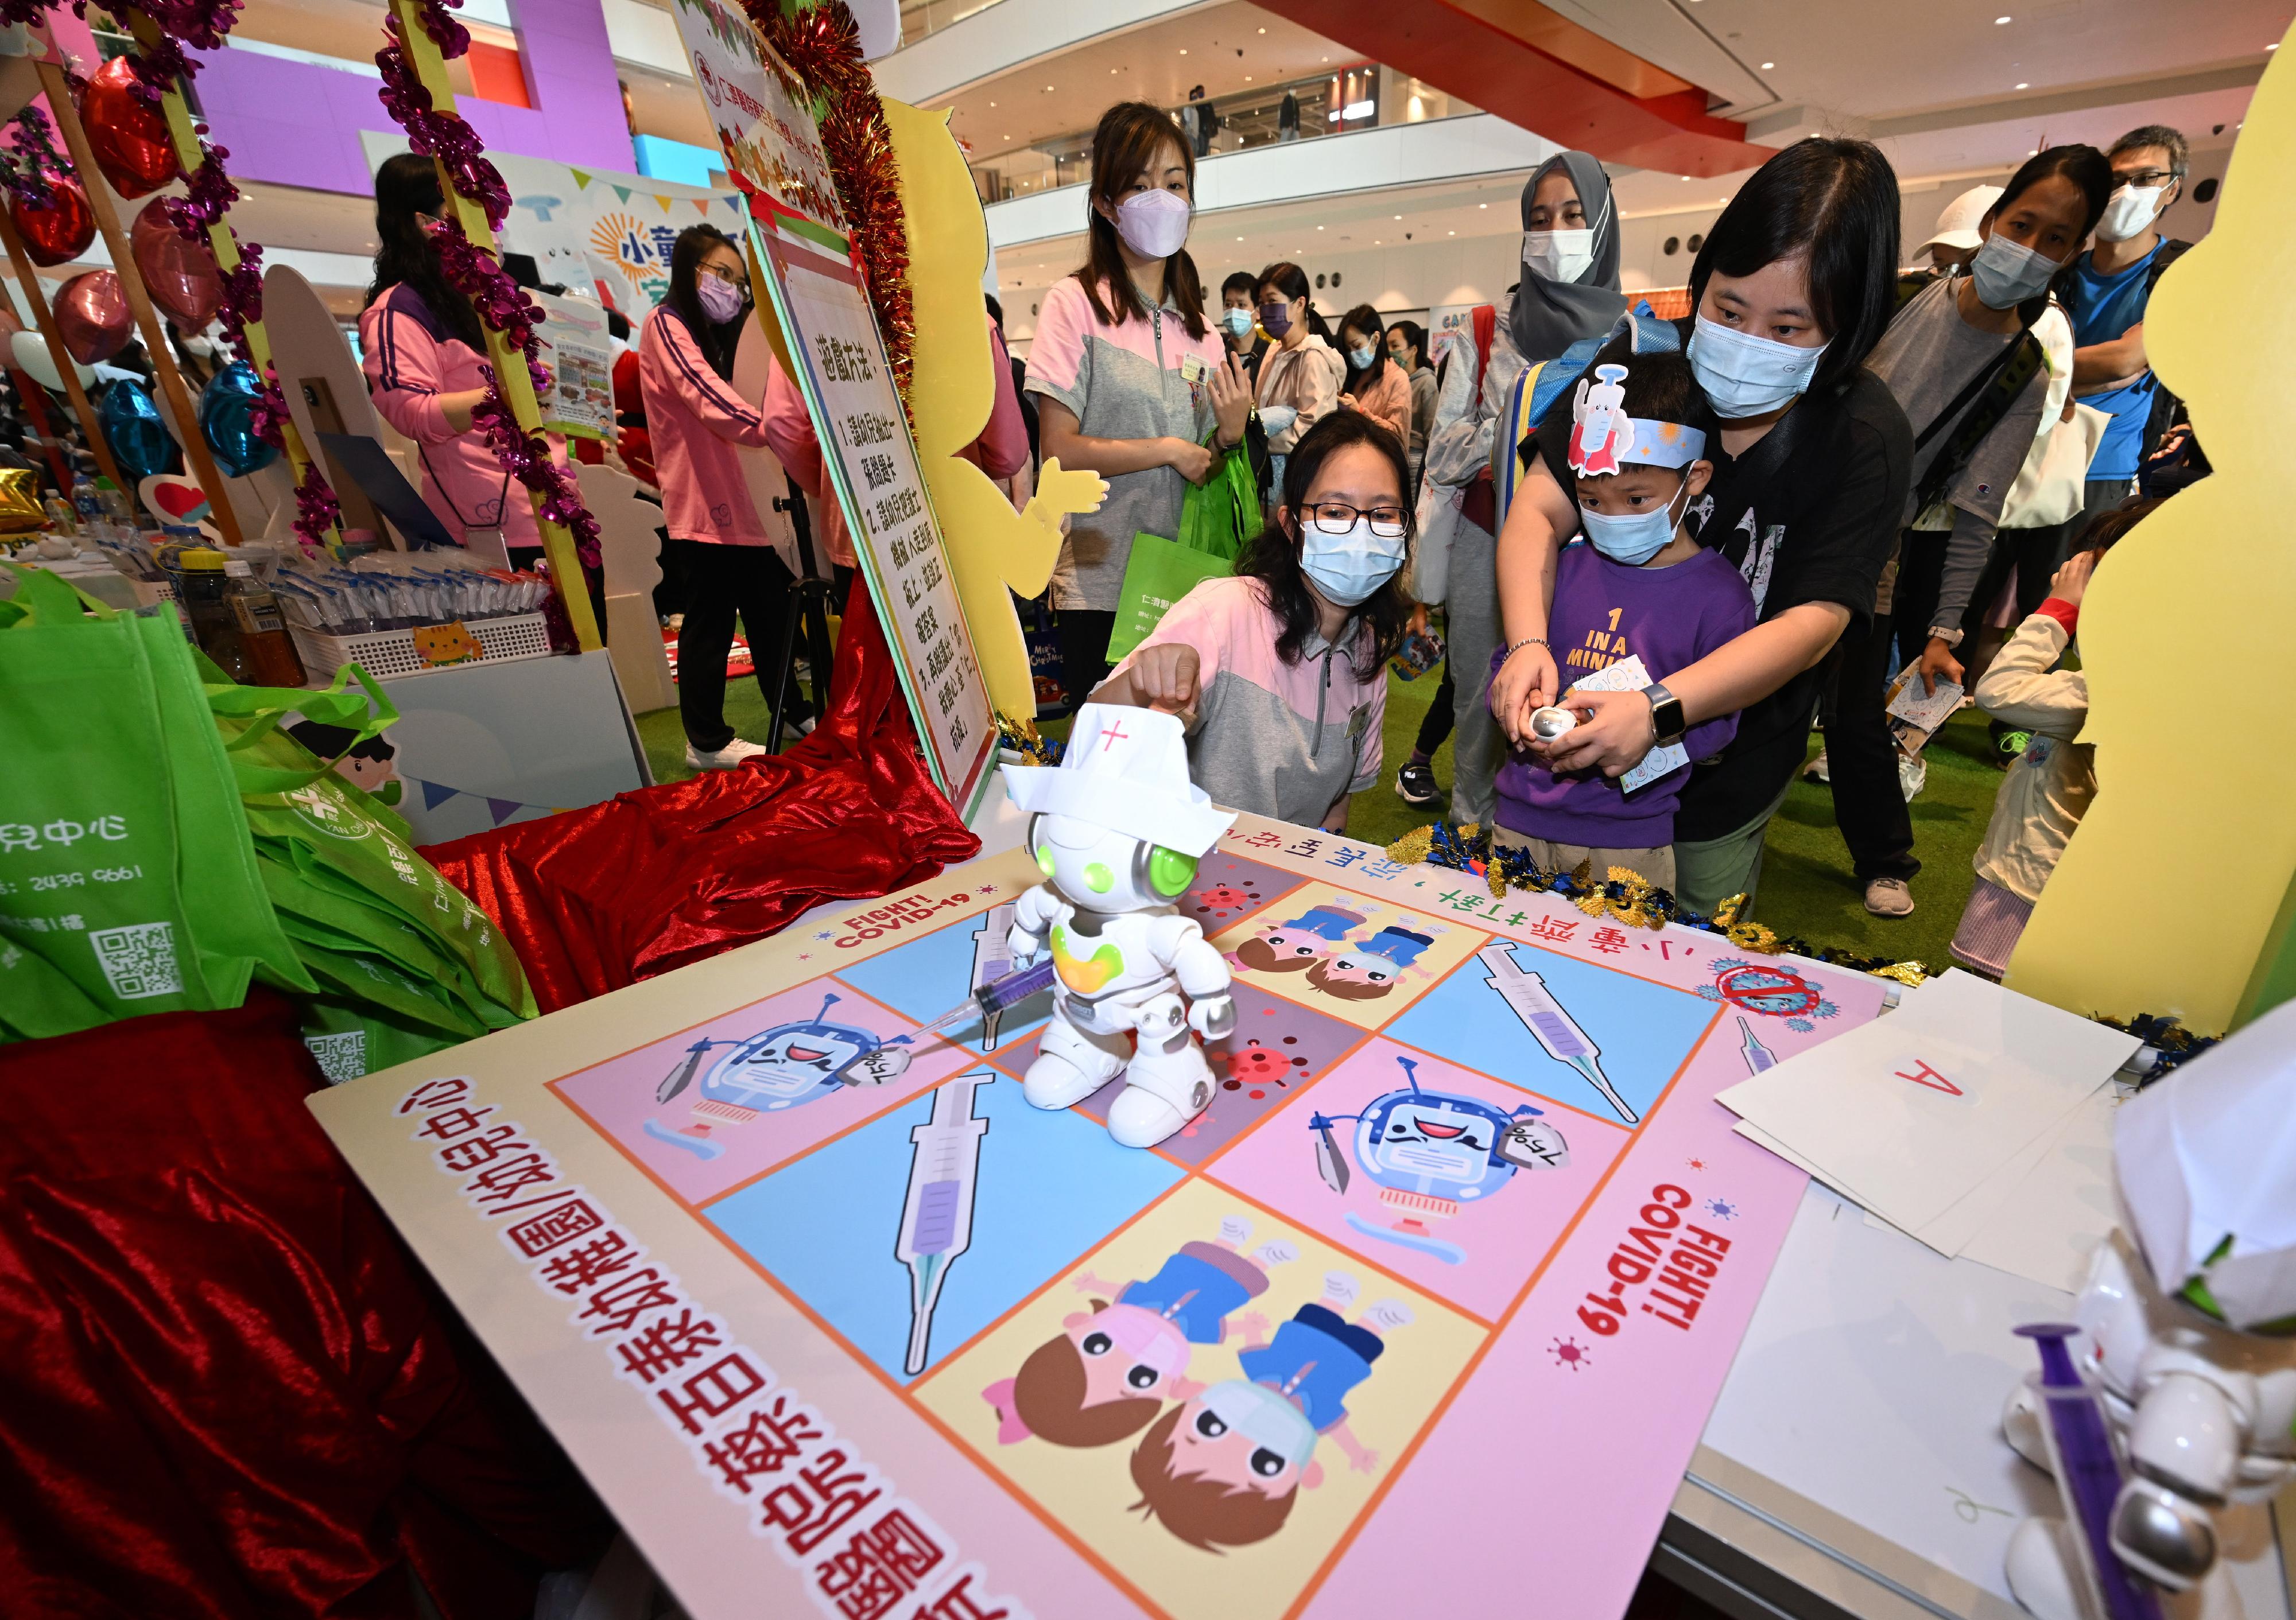 The Government held "Children with jabs, parents with ease" parent-child activities at D·PARK in Tsuen Wan today (December 3) to promote COVID-19 vaccination of children. There were COVID-19 vaccination-themed game booths designed by teachers, students and parents from a number of kindergartens for the public to learn together with their families more about the importance of COVID-19 vaccination through the games. Photo shows the booth game designed by the Yan Chai Hospital Choi Pat Tai Kindergarten/Child Care Centre which won the championship of the most creative booth game.